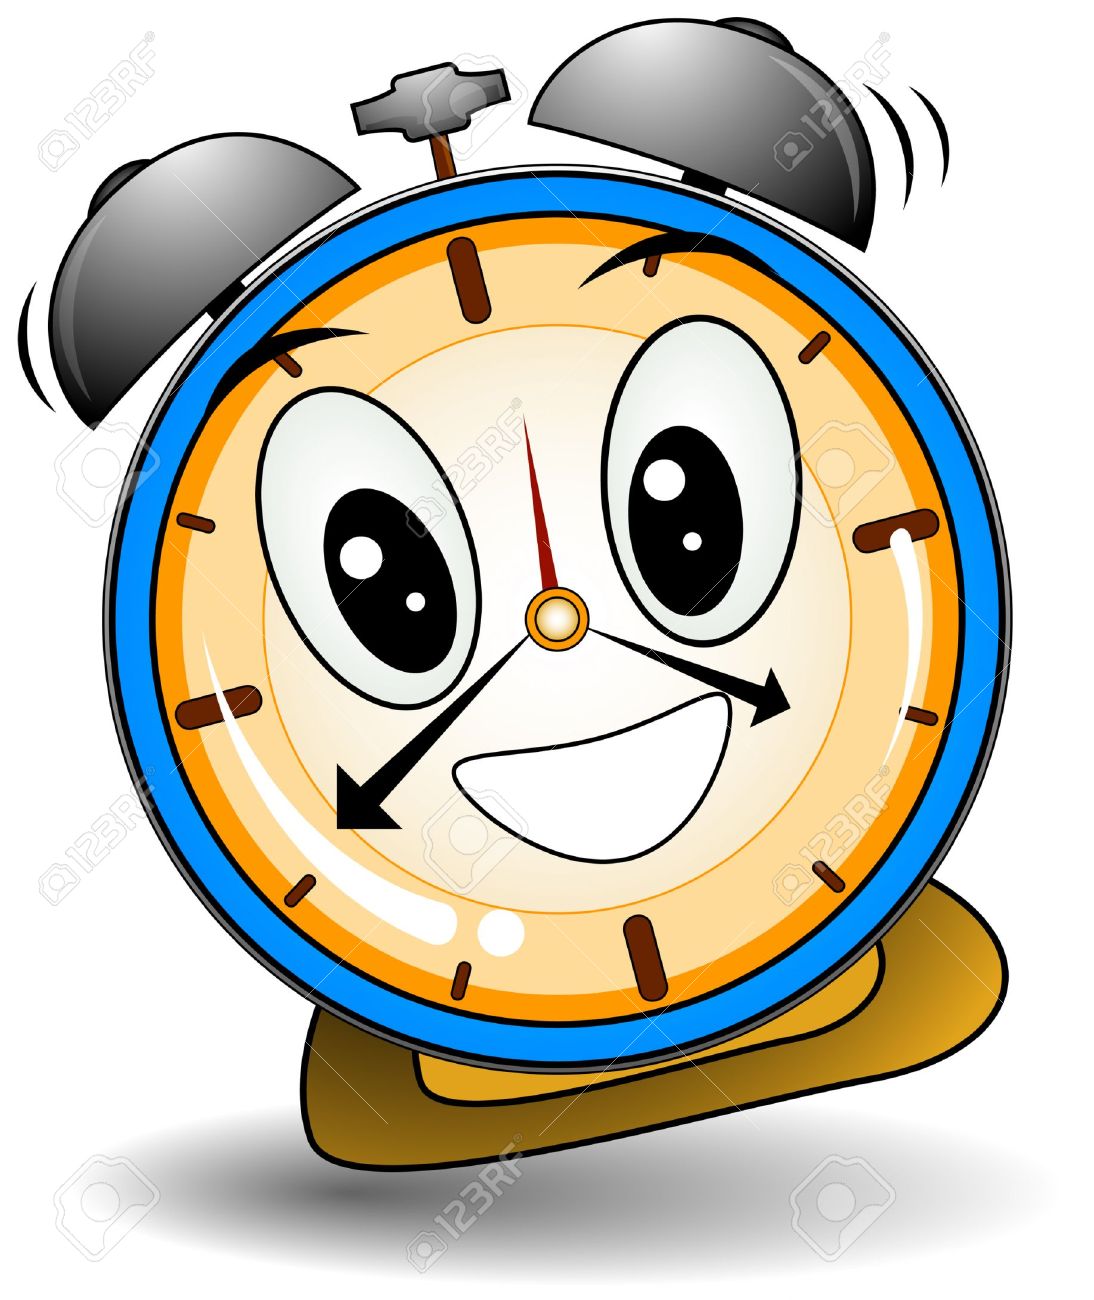 free clipart of clock - photo #37